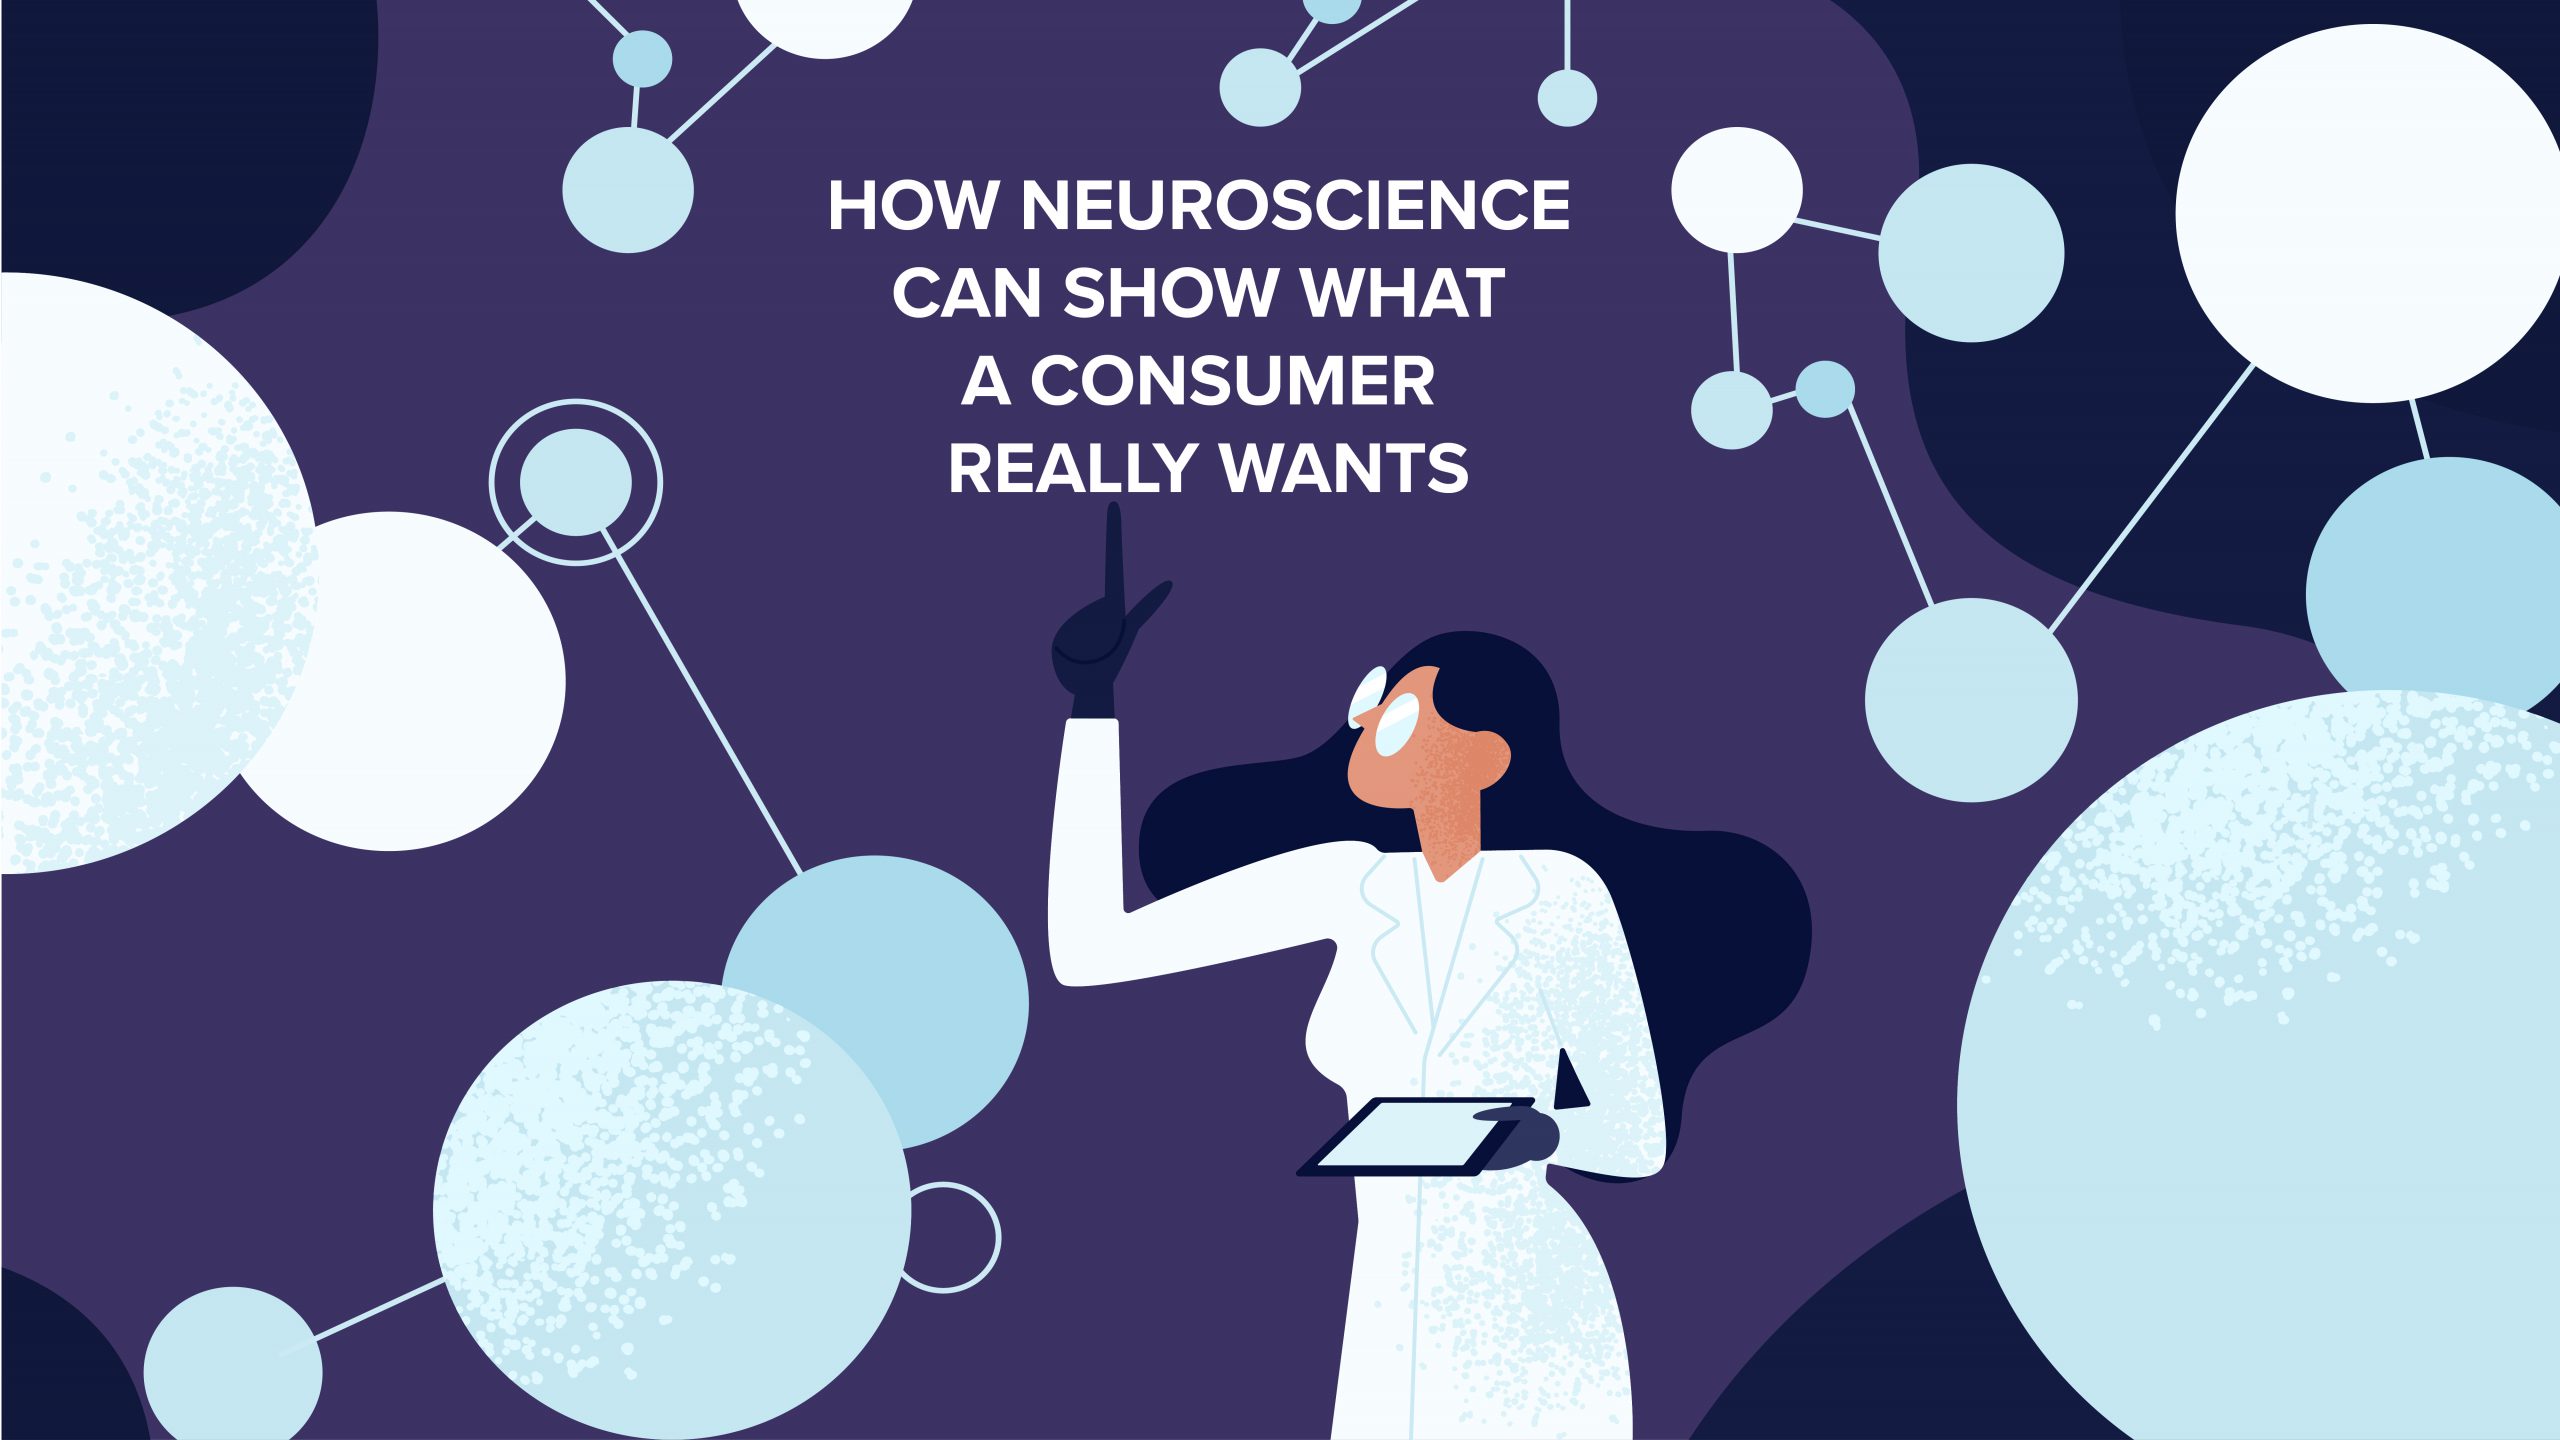 How Neuroscience Can Reveal What a Consumer Really Wants